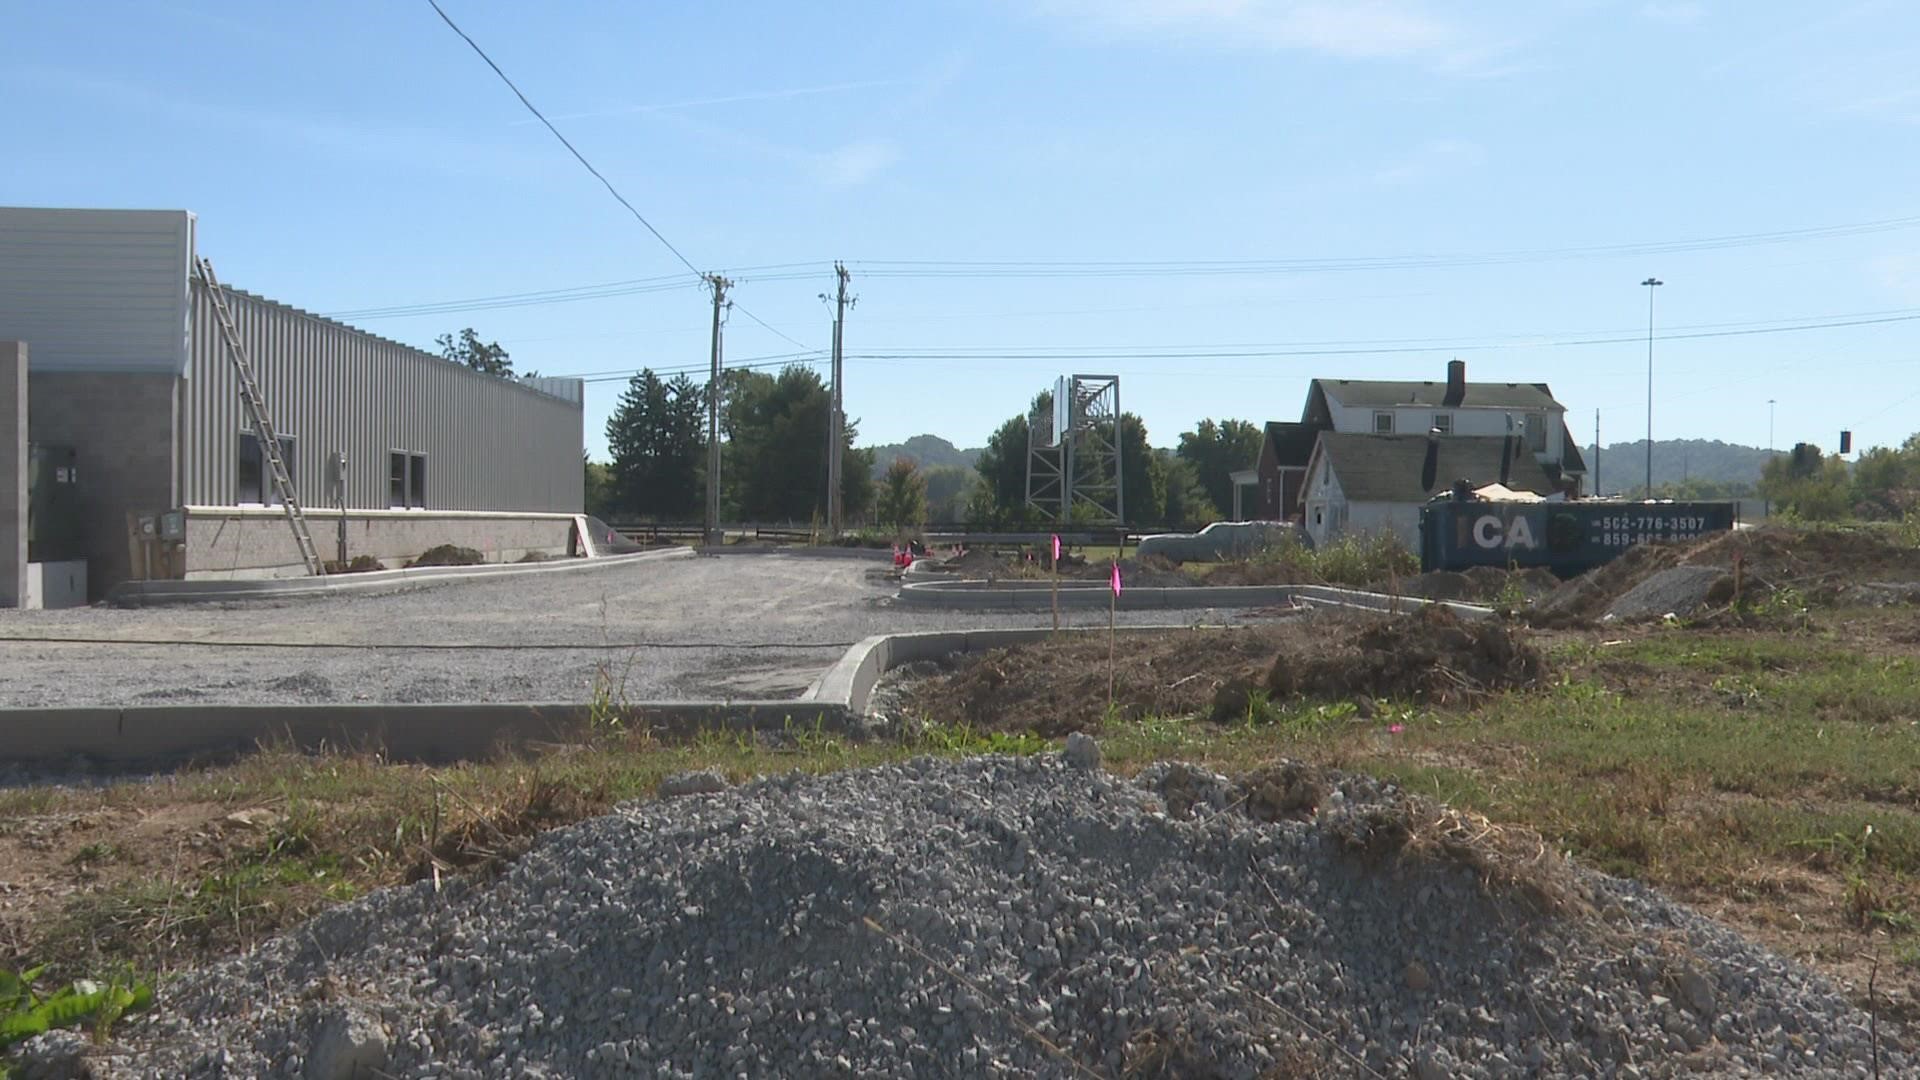 Jason Jones got a notice from Louisville Forward about a business scheduled to be built next door, but they didn't tell him the construction would surround his home.